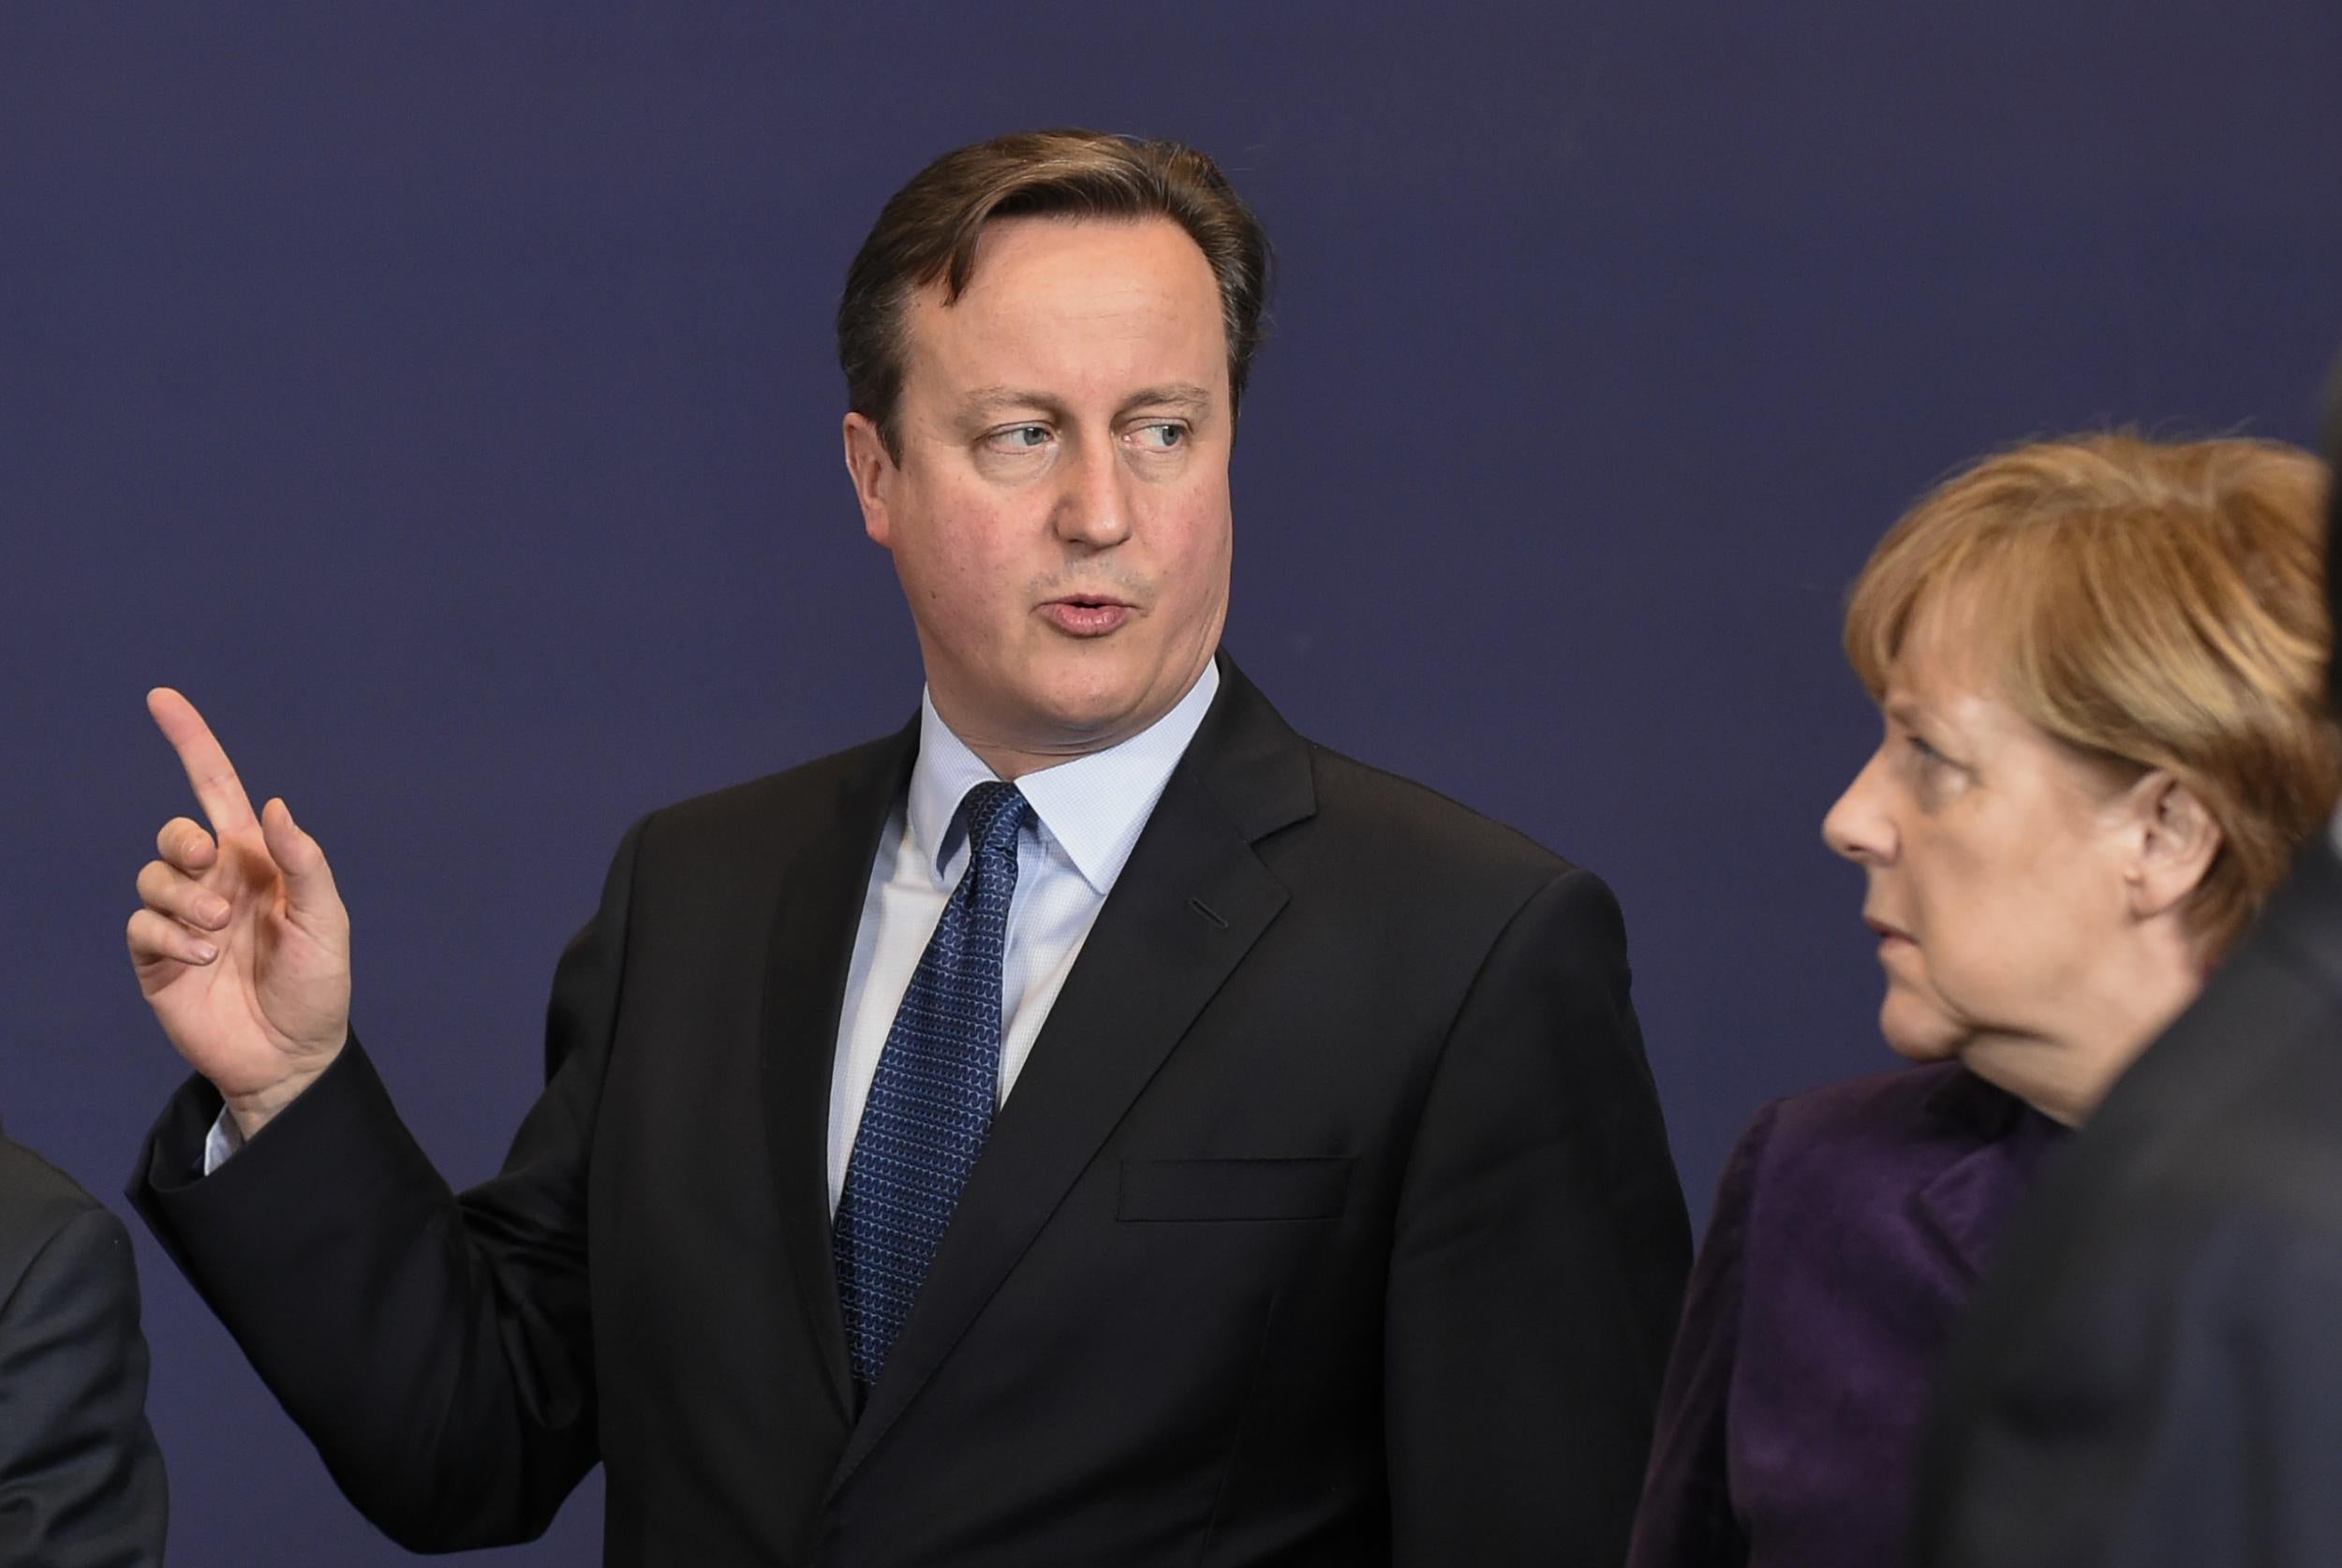 David Cameron flanked by German Chancellor Angela Merkel at the European Union (EU) summit of the year at the European Council in Brussels in December 2015